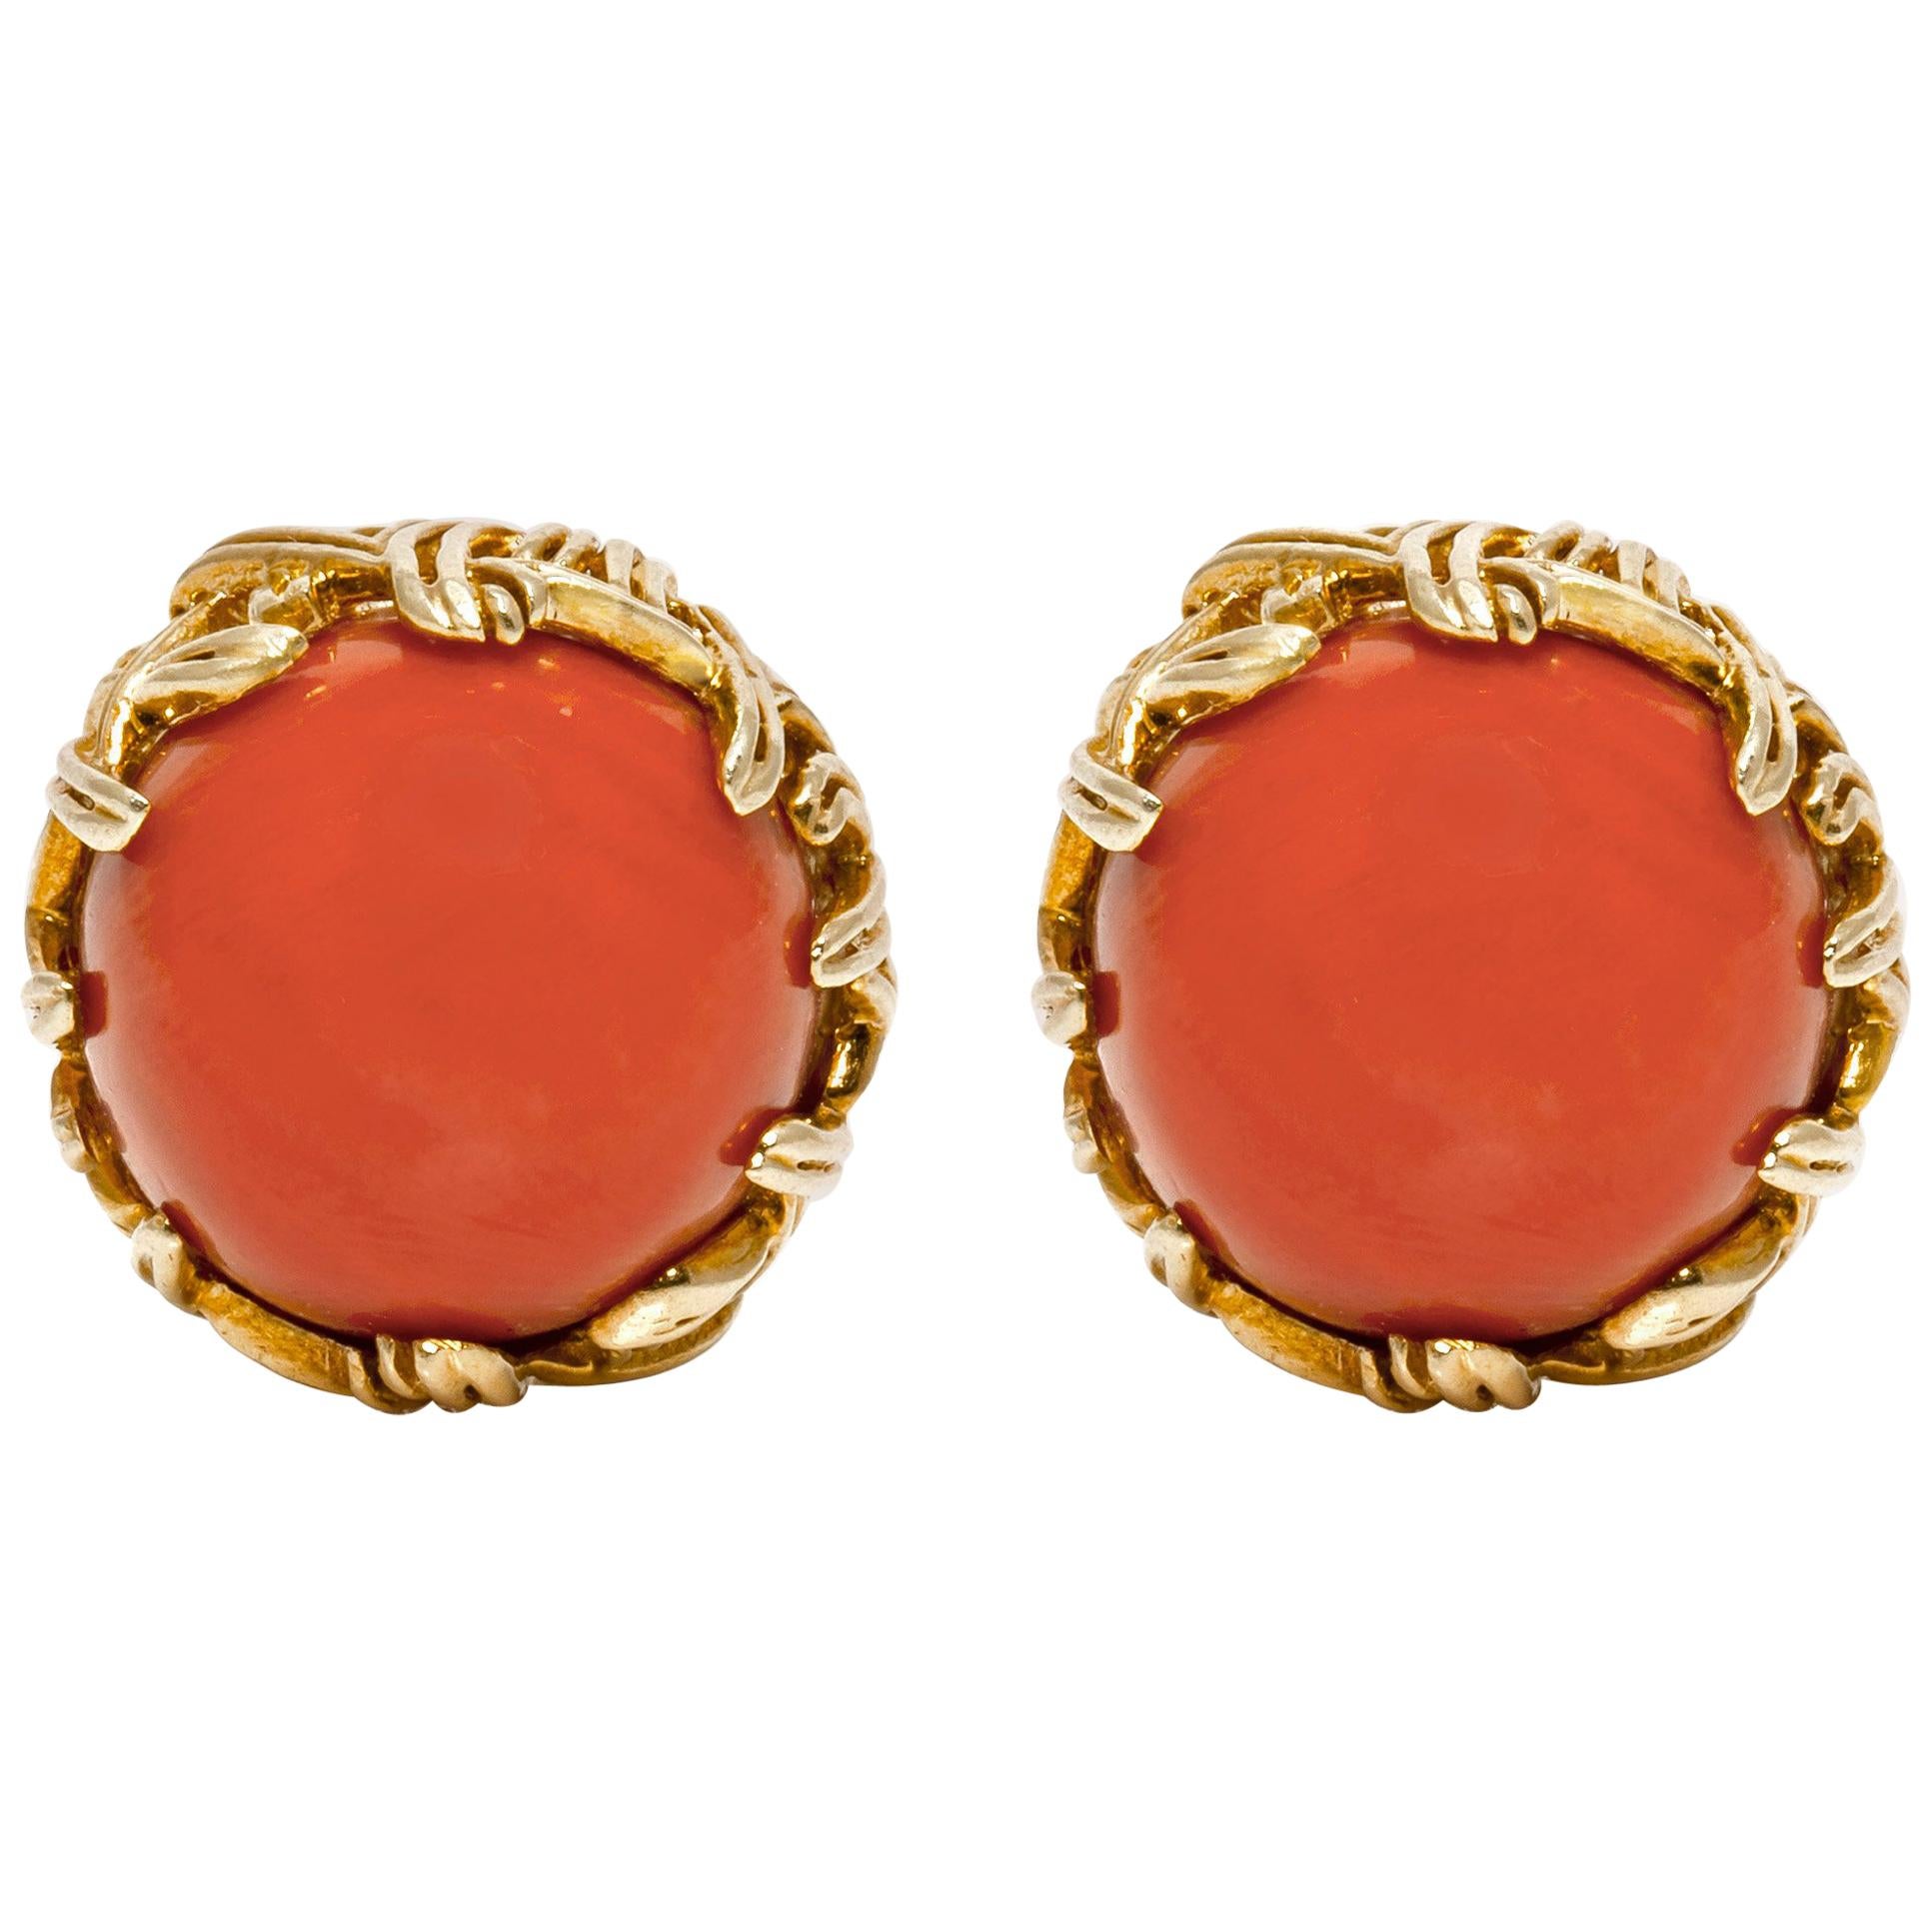 Tiffany & Co. 18 Karat Yellow Gold Red Coral Earrings